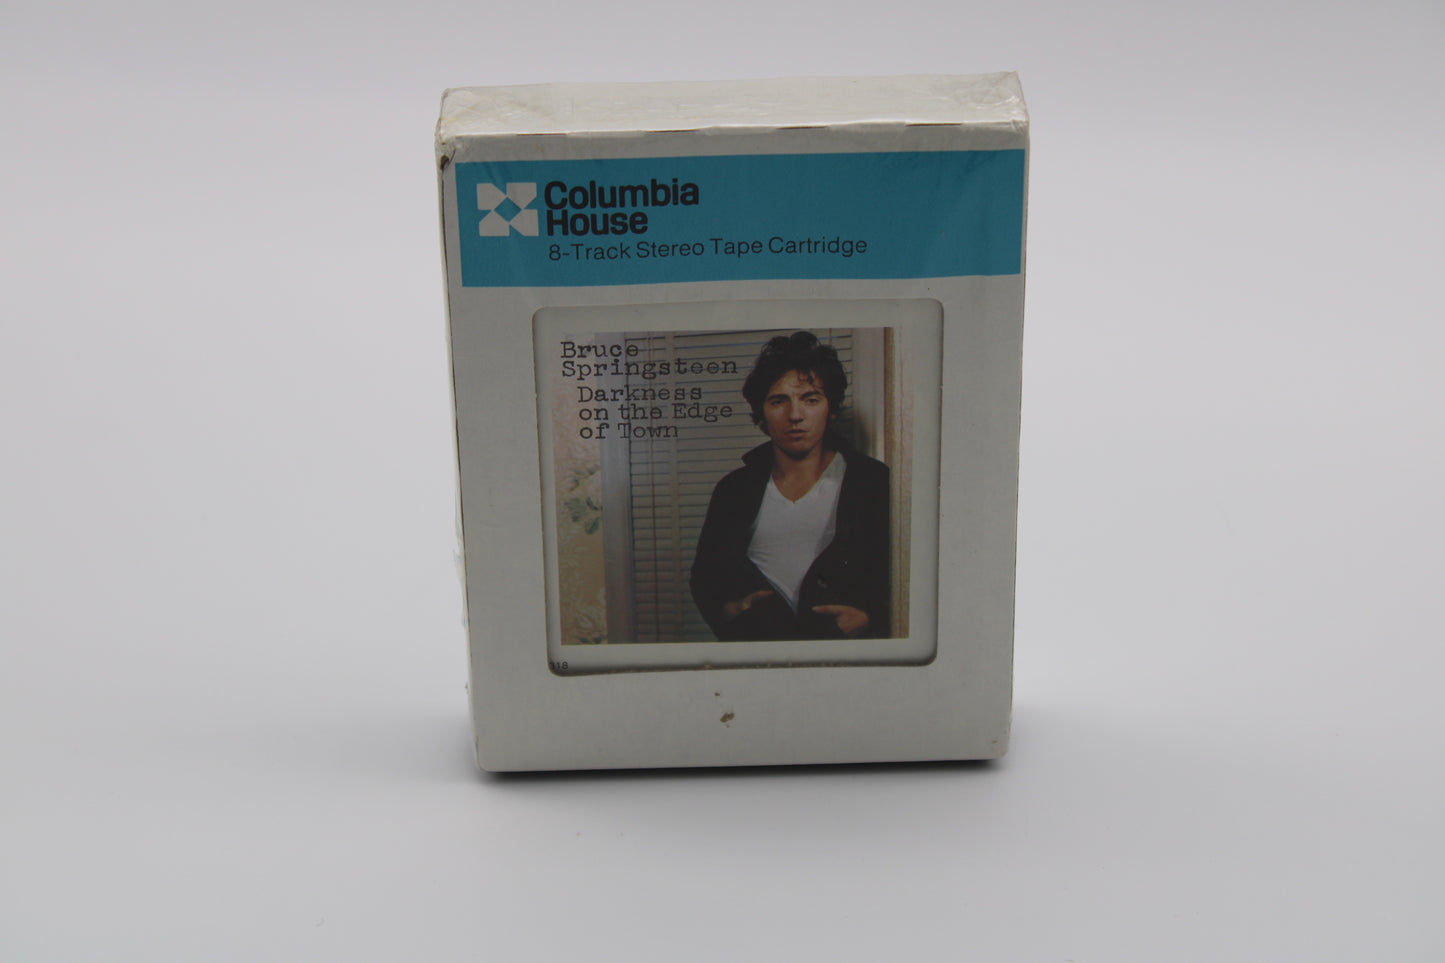 Bruce Springsteen SEALED Darkness On The Edge of Town - Sealed 8 Track Tape Columbia Collectible